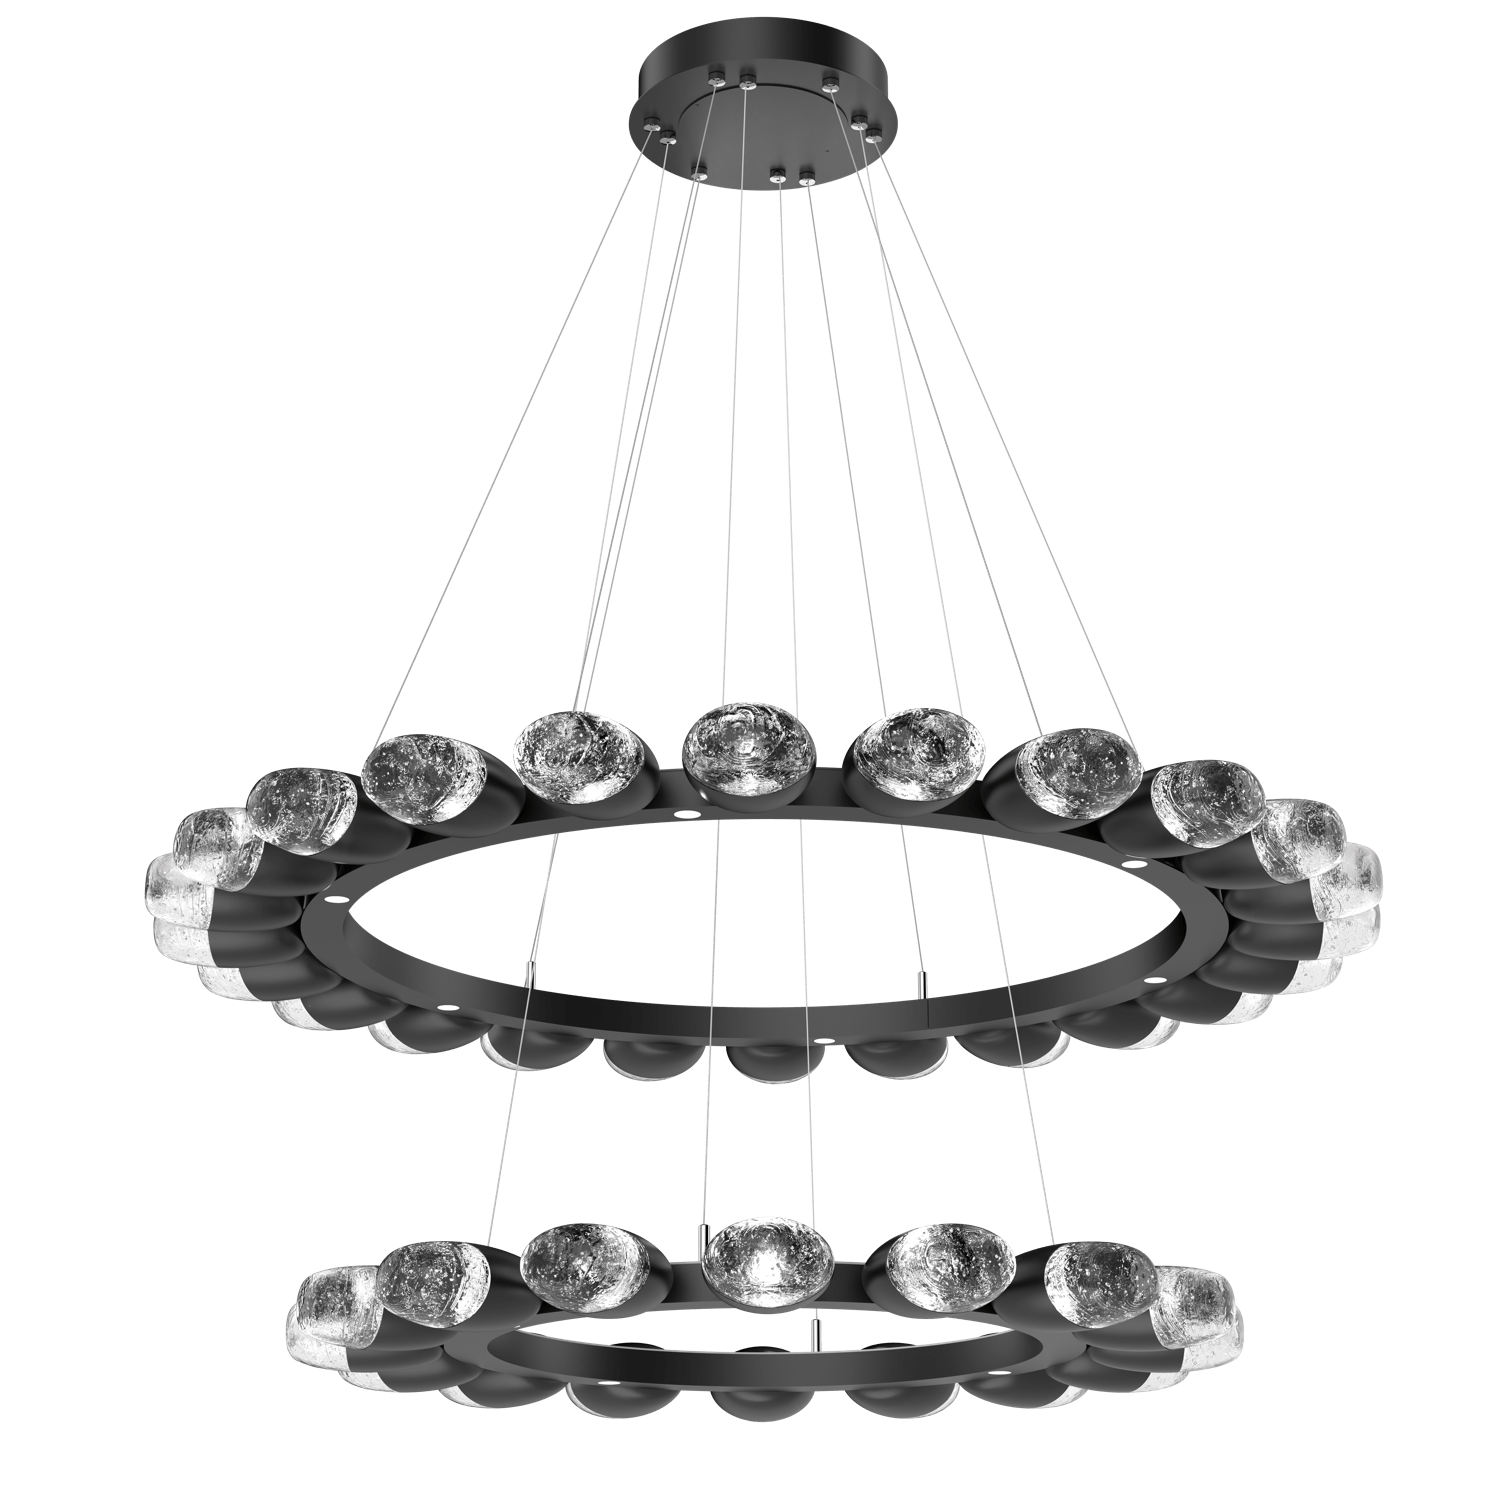 CHB0079-2T-MB-Hammerton-Studio-Pebble-48-inch-two-tier-radial-ring-chandelier-with-matte-black-finish-and-clear-cast-glass-shades-and-LED-lamping